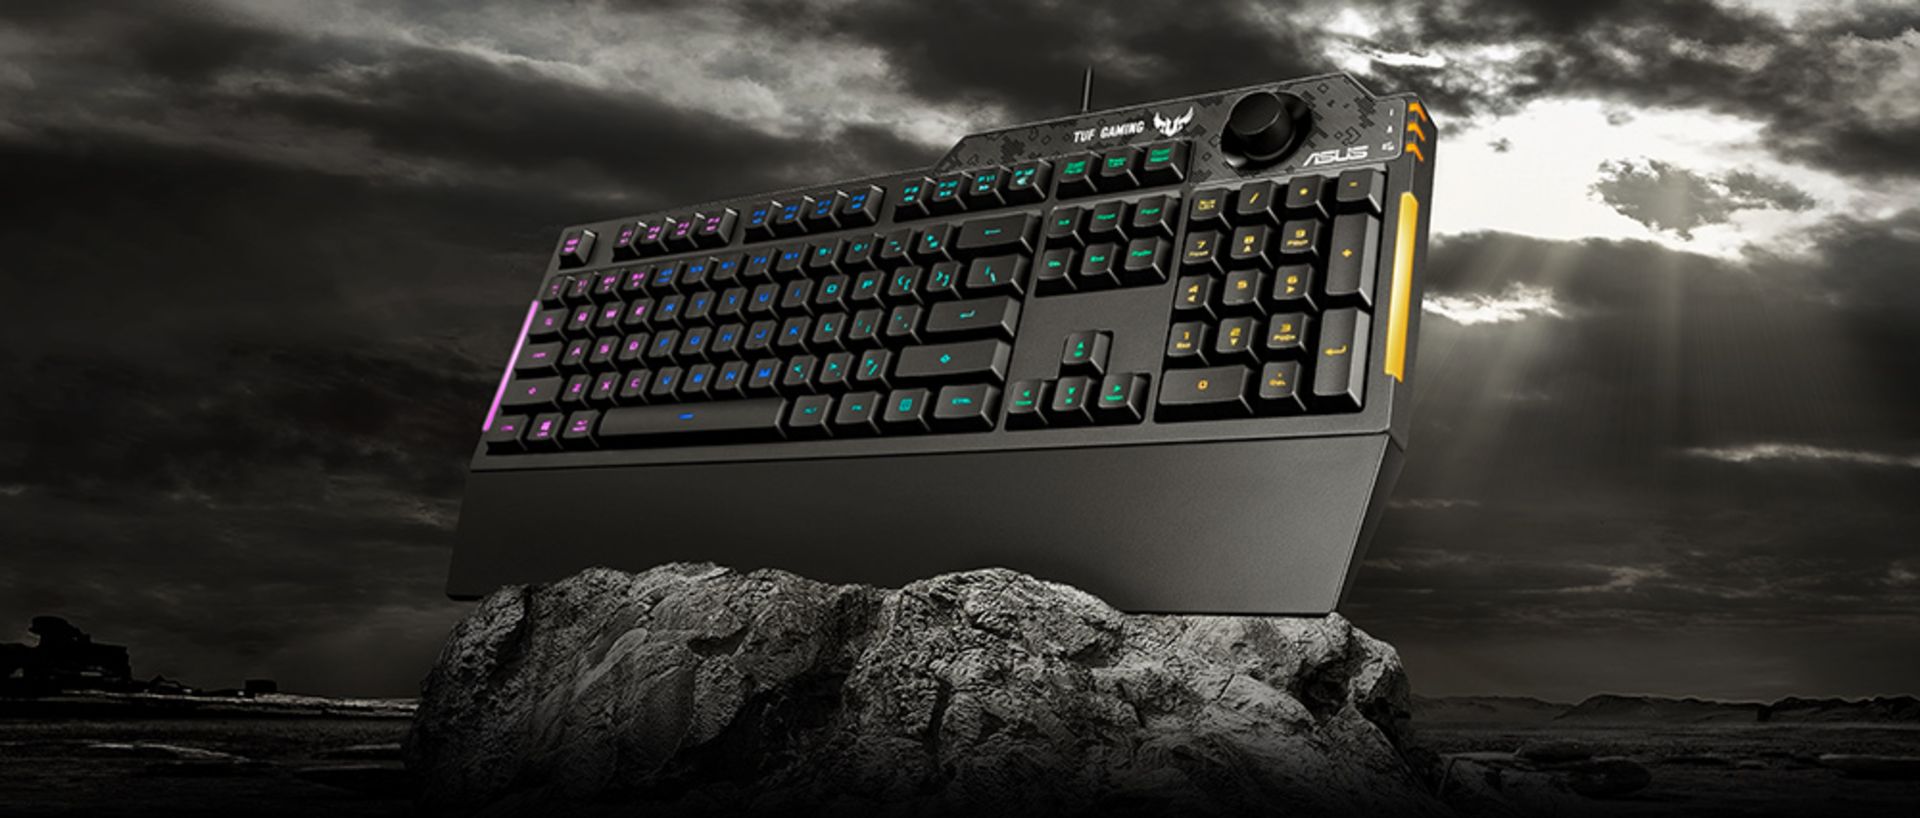 1 x Asus TUF K1 RGB Gaming Keyboard - Brand New and Boxed - Features Volume Control, Side Light - Image 5 of 8